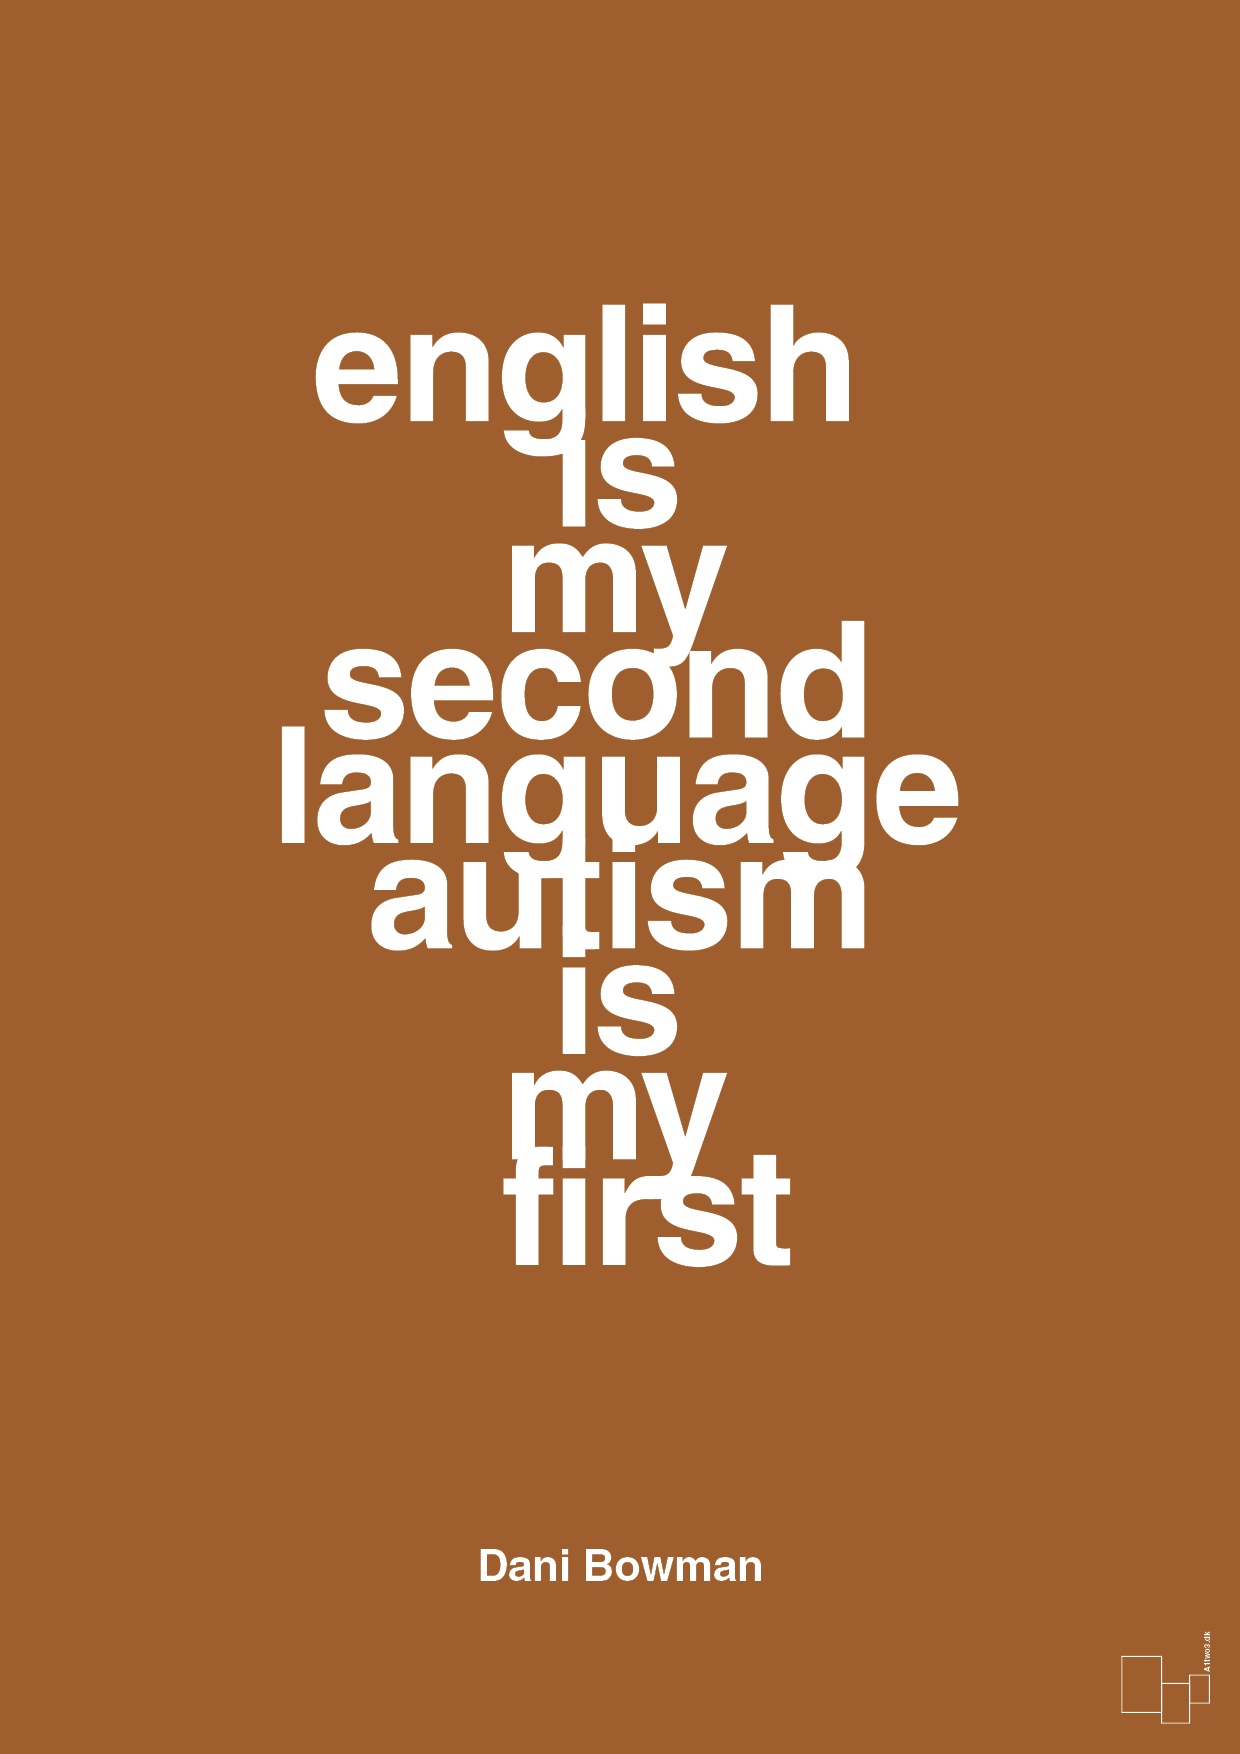 english is my second language autism is my first - Plakat med Samfund i Cognac